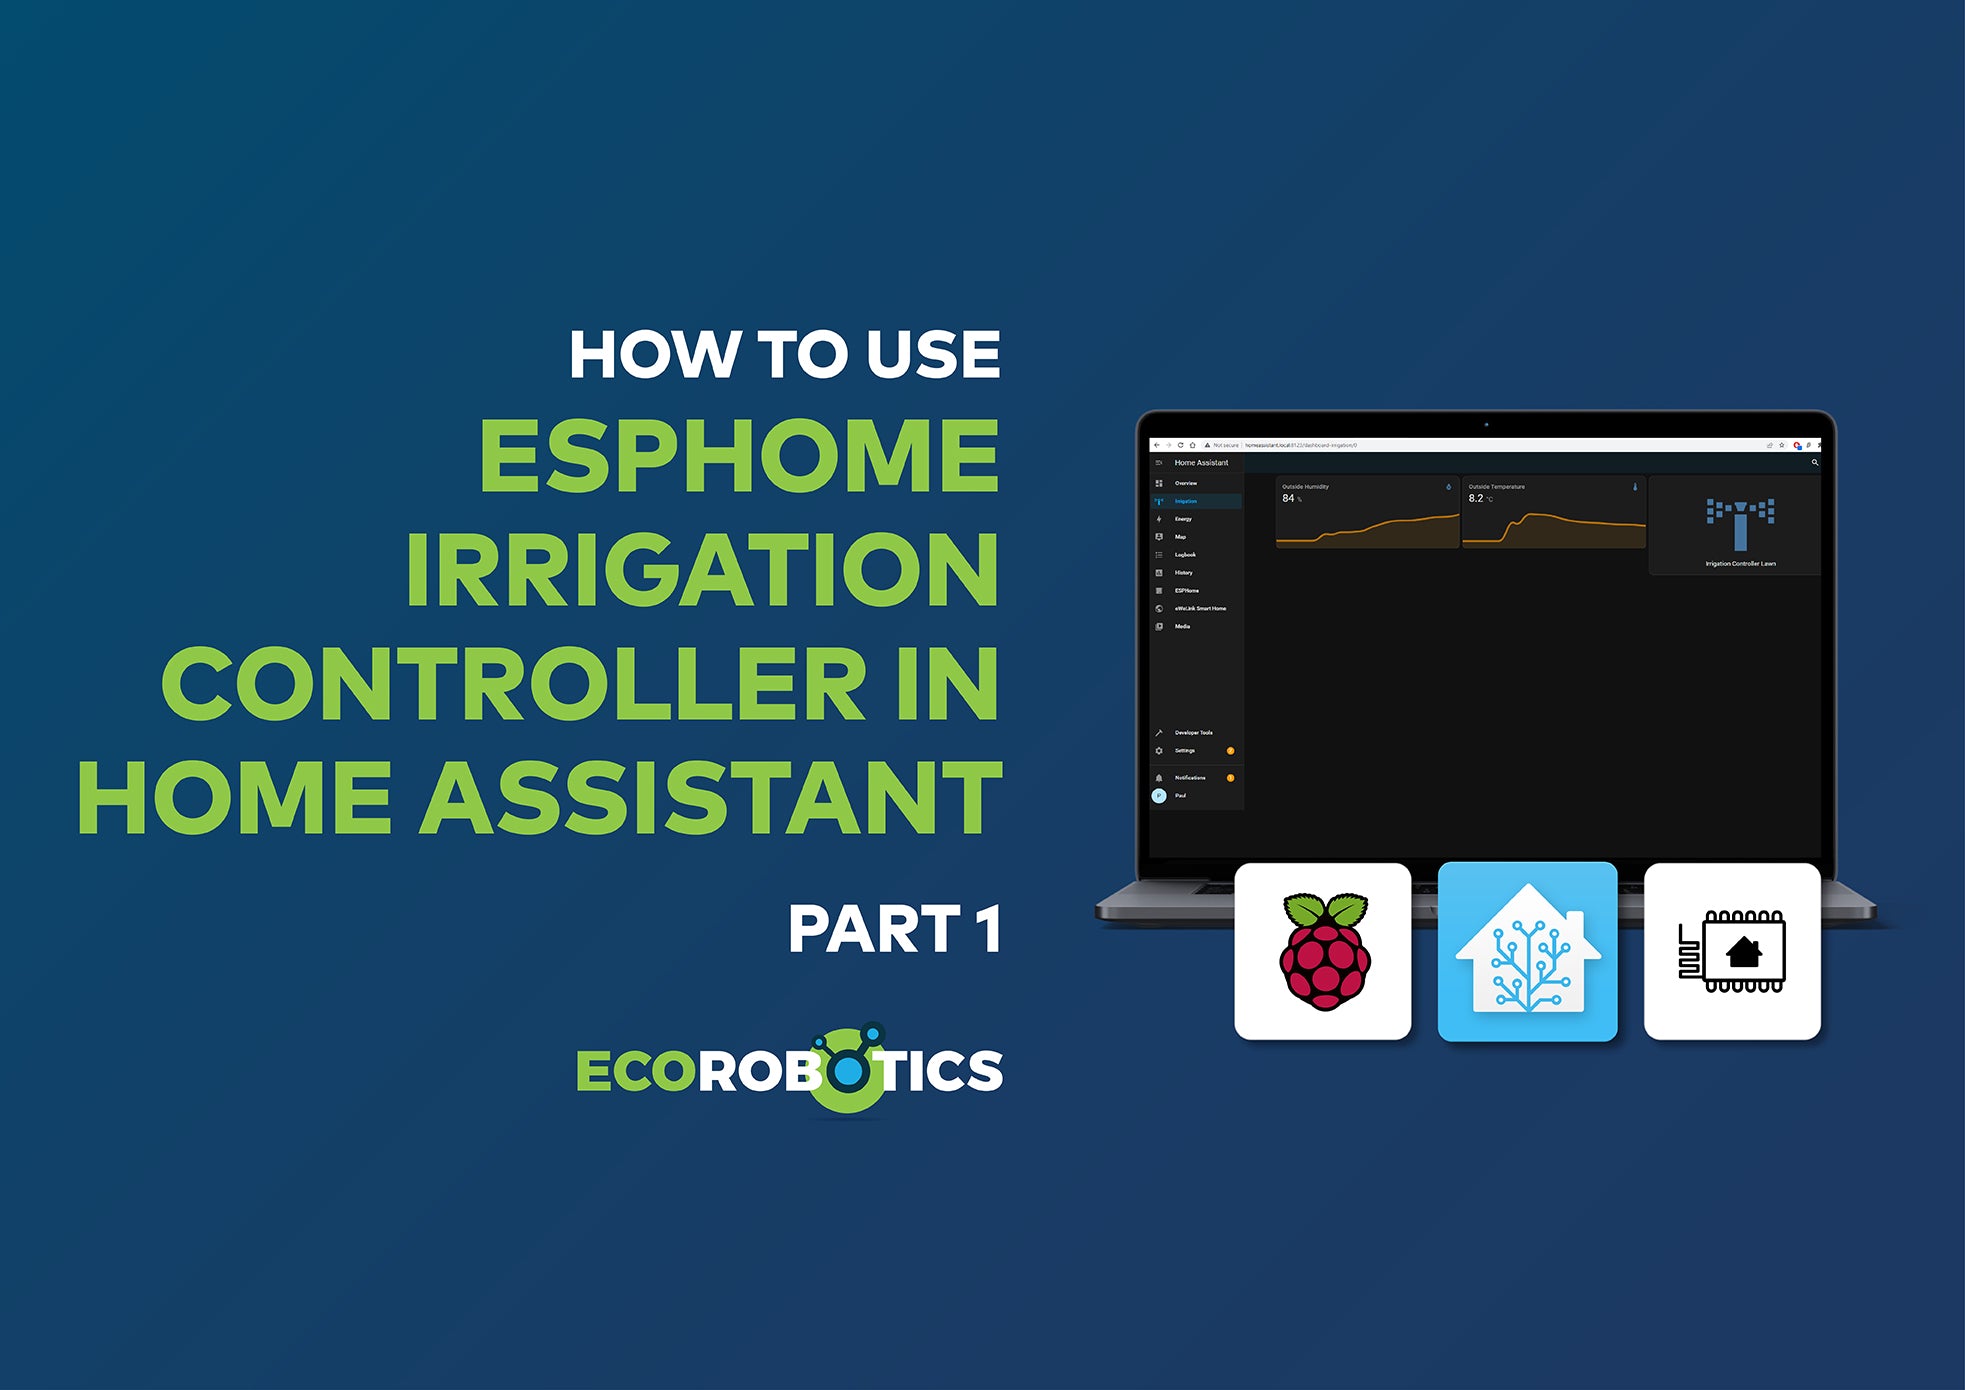 HOW TO USE ESPHOME IRRIGATION CONTROLLER IN HOME ASSISTANT (Part 1)